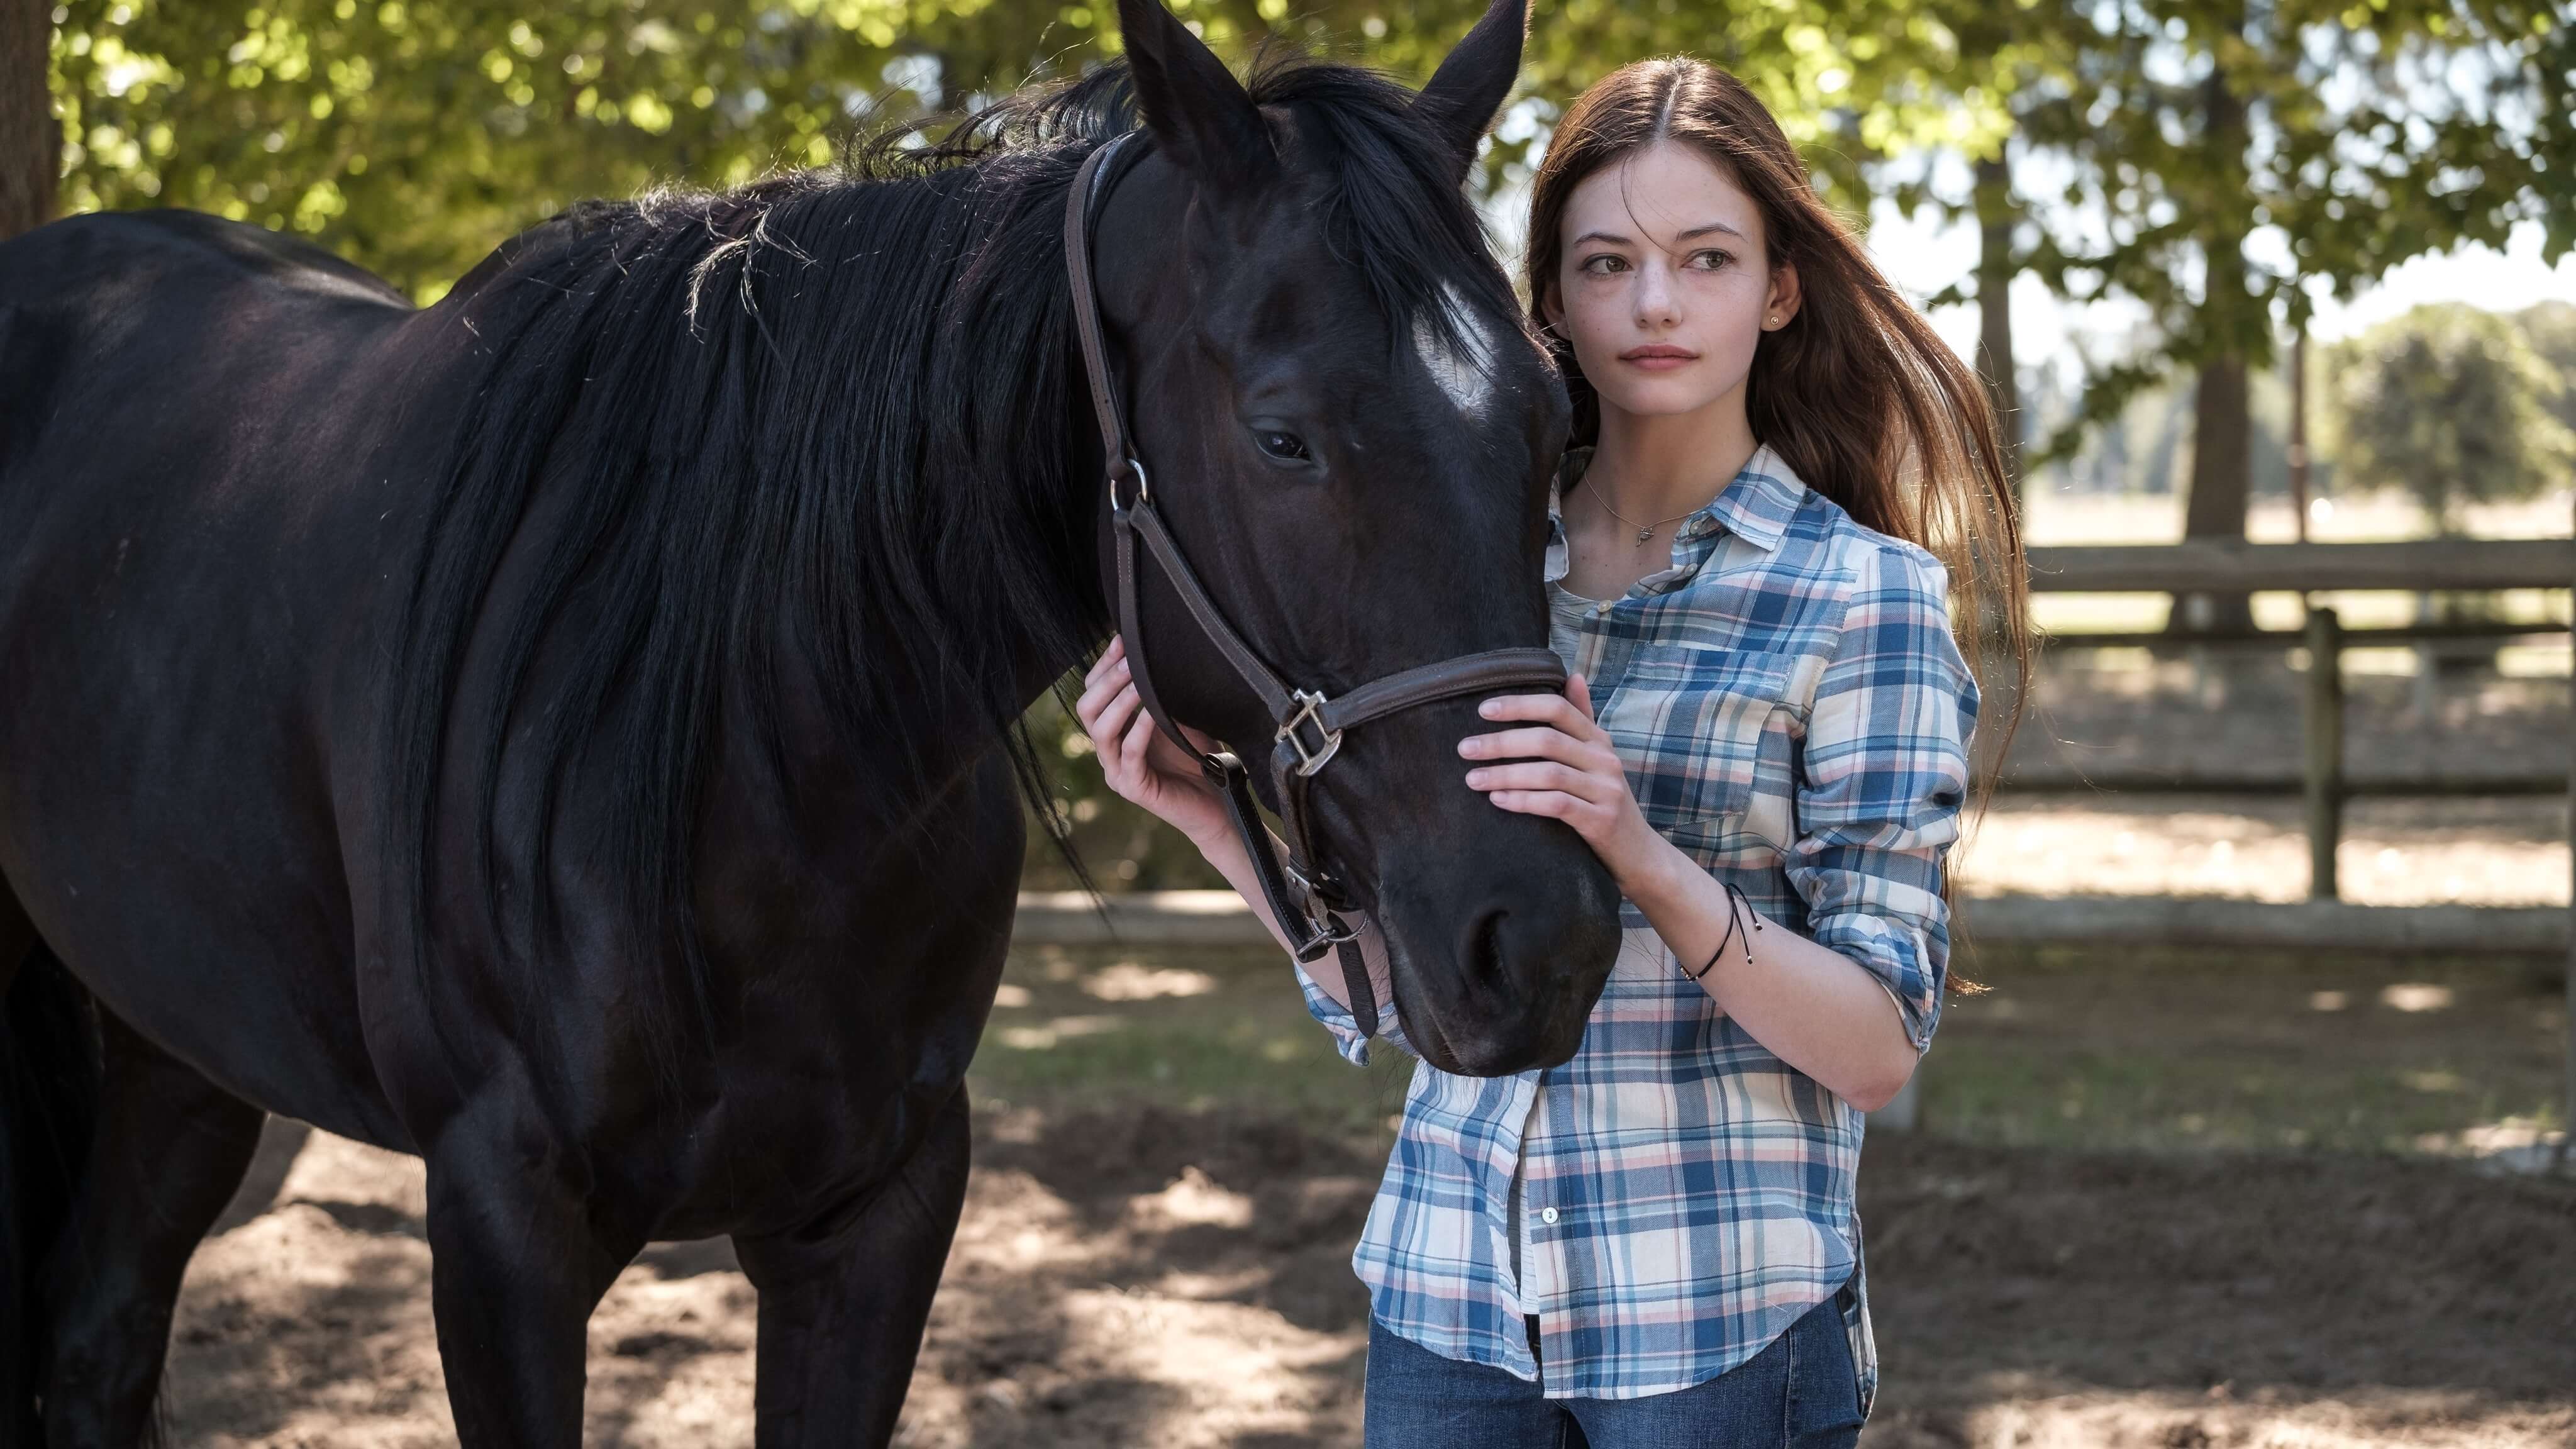 Disney+ Debuts New Trailer and Poster For ‘Black Beauty’